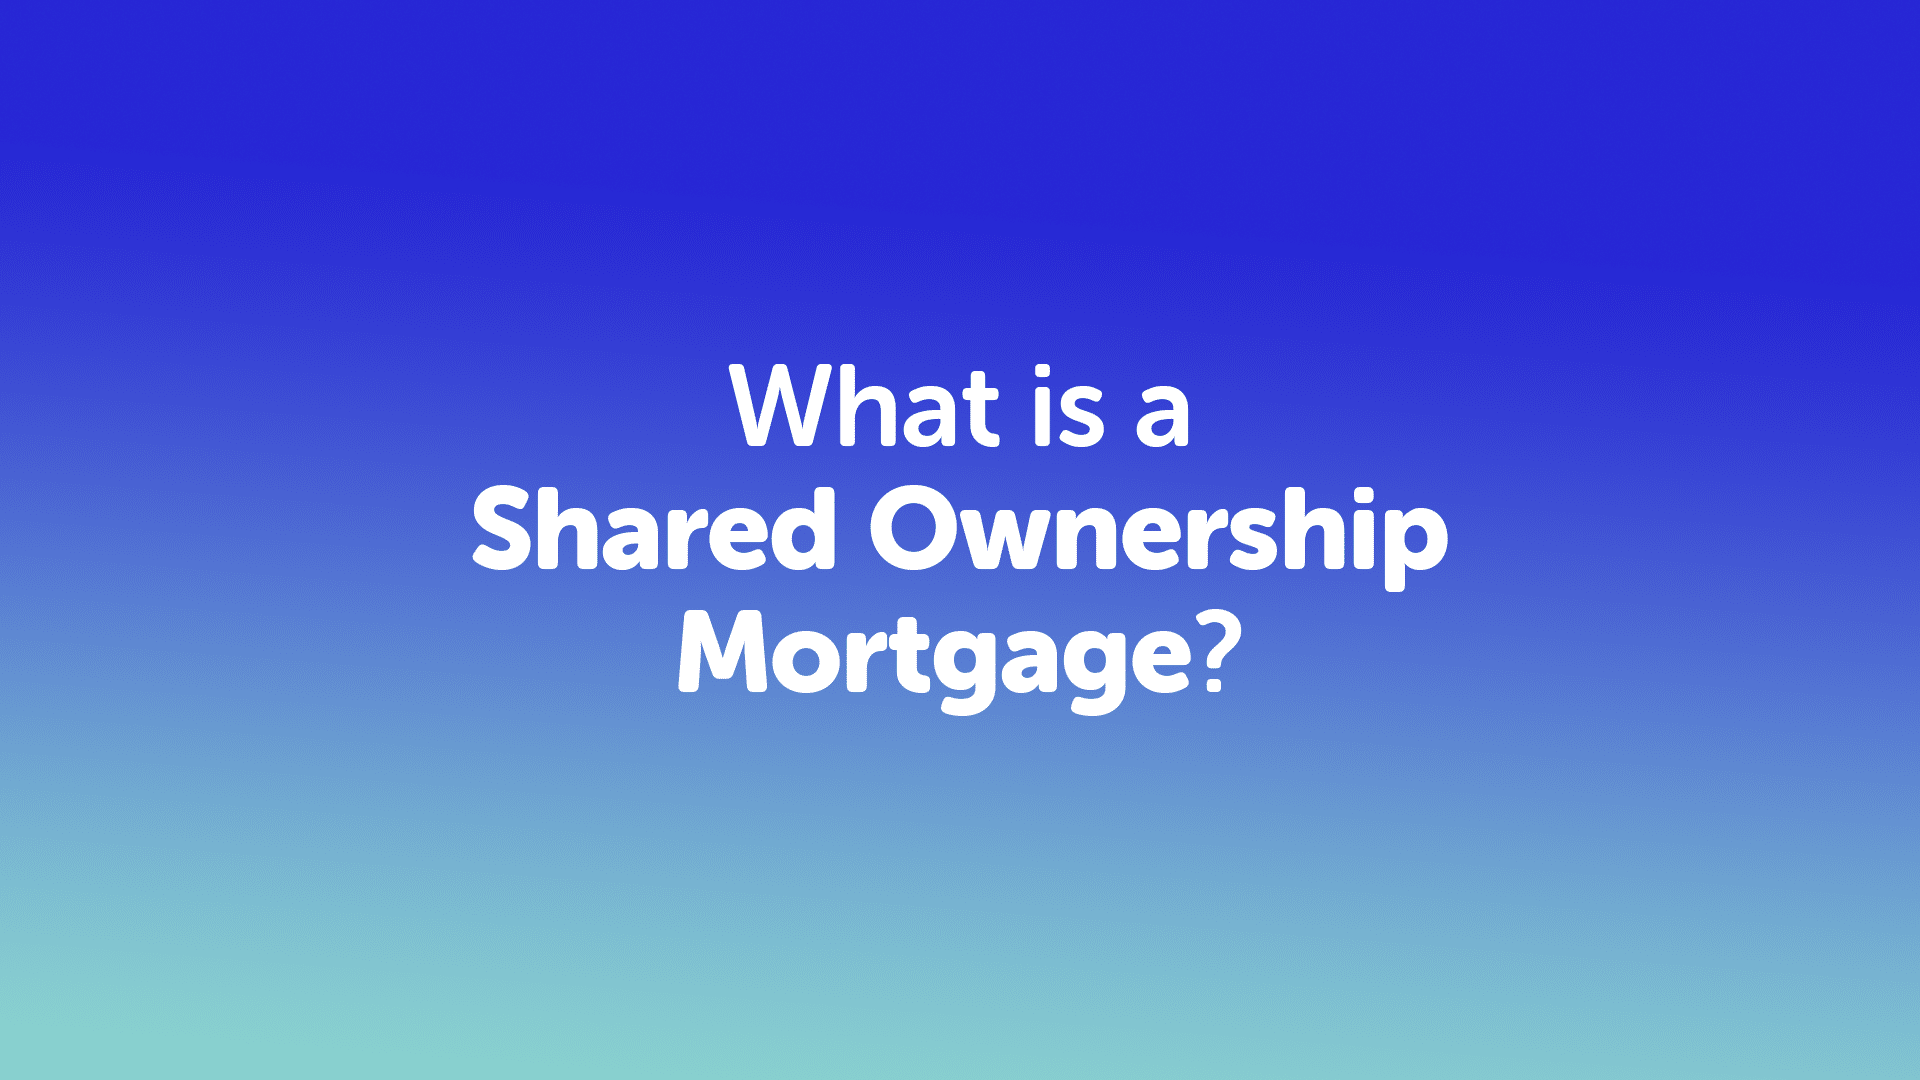 What is a Shared Ownership Mortgage